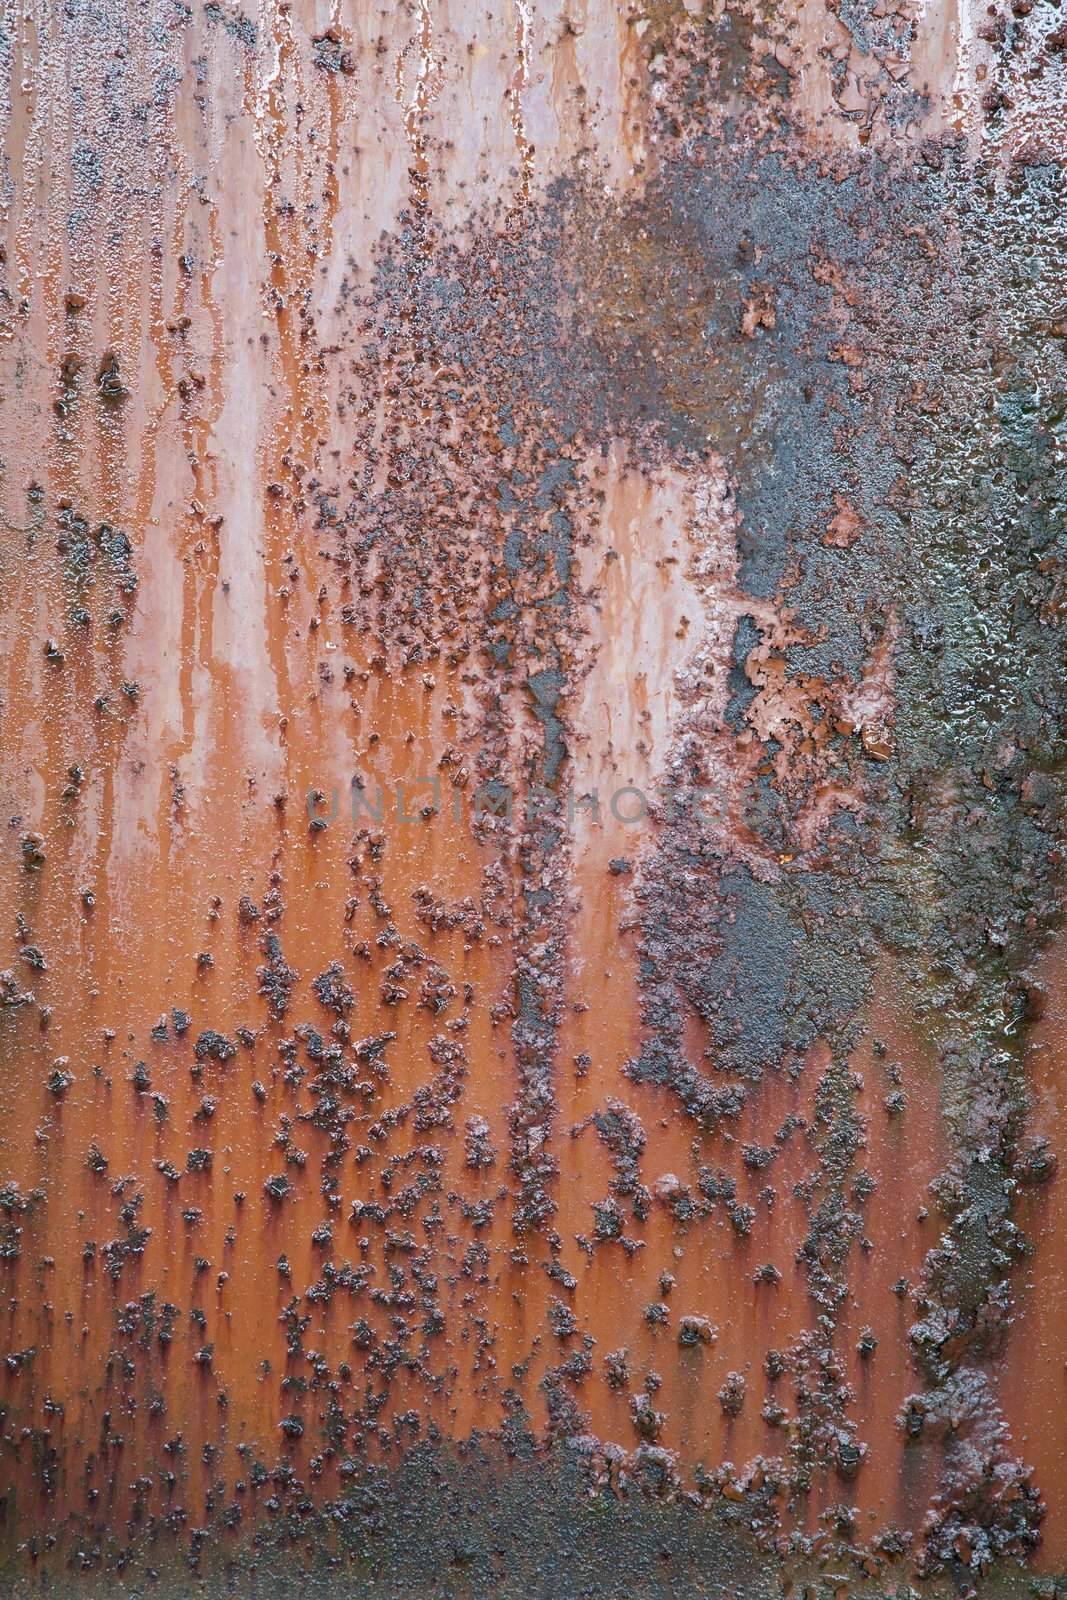 The red rusty old metal wall